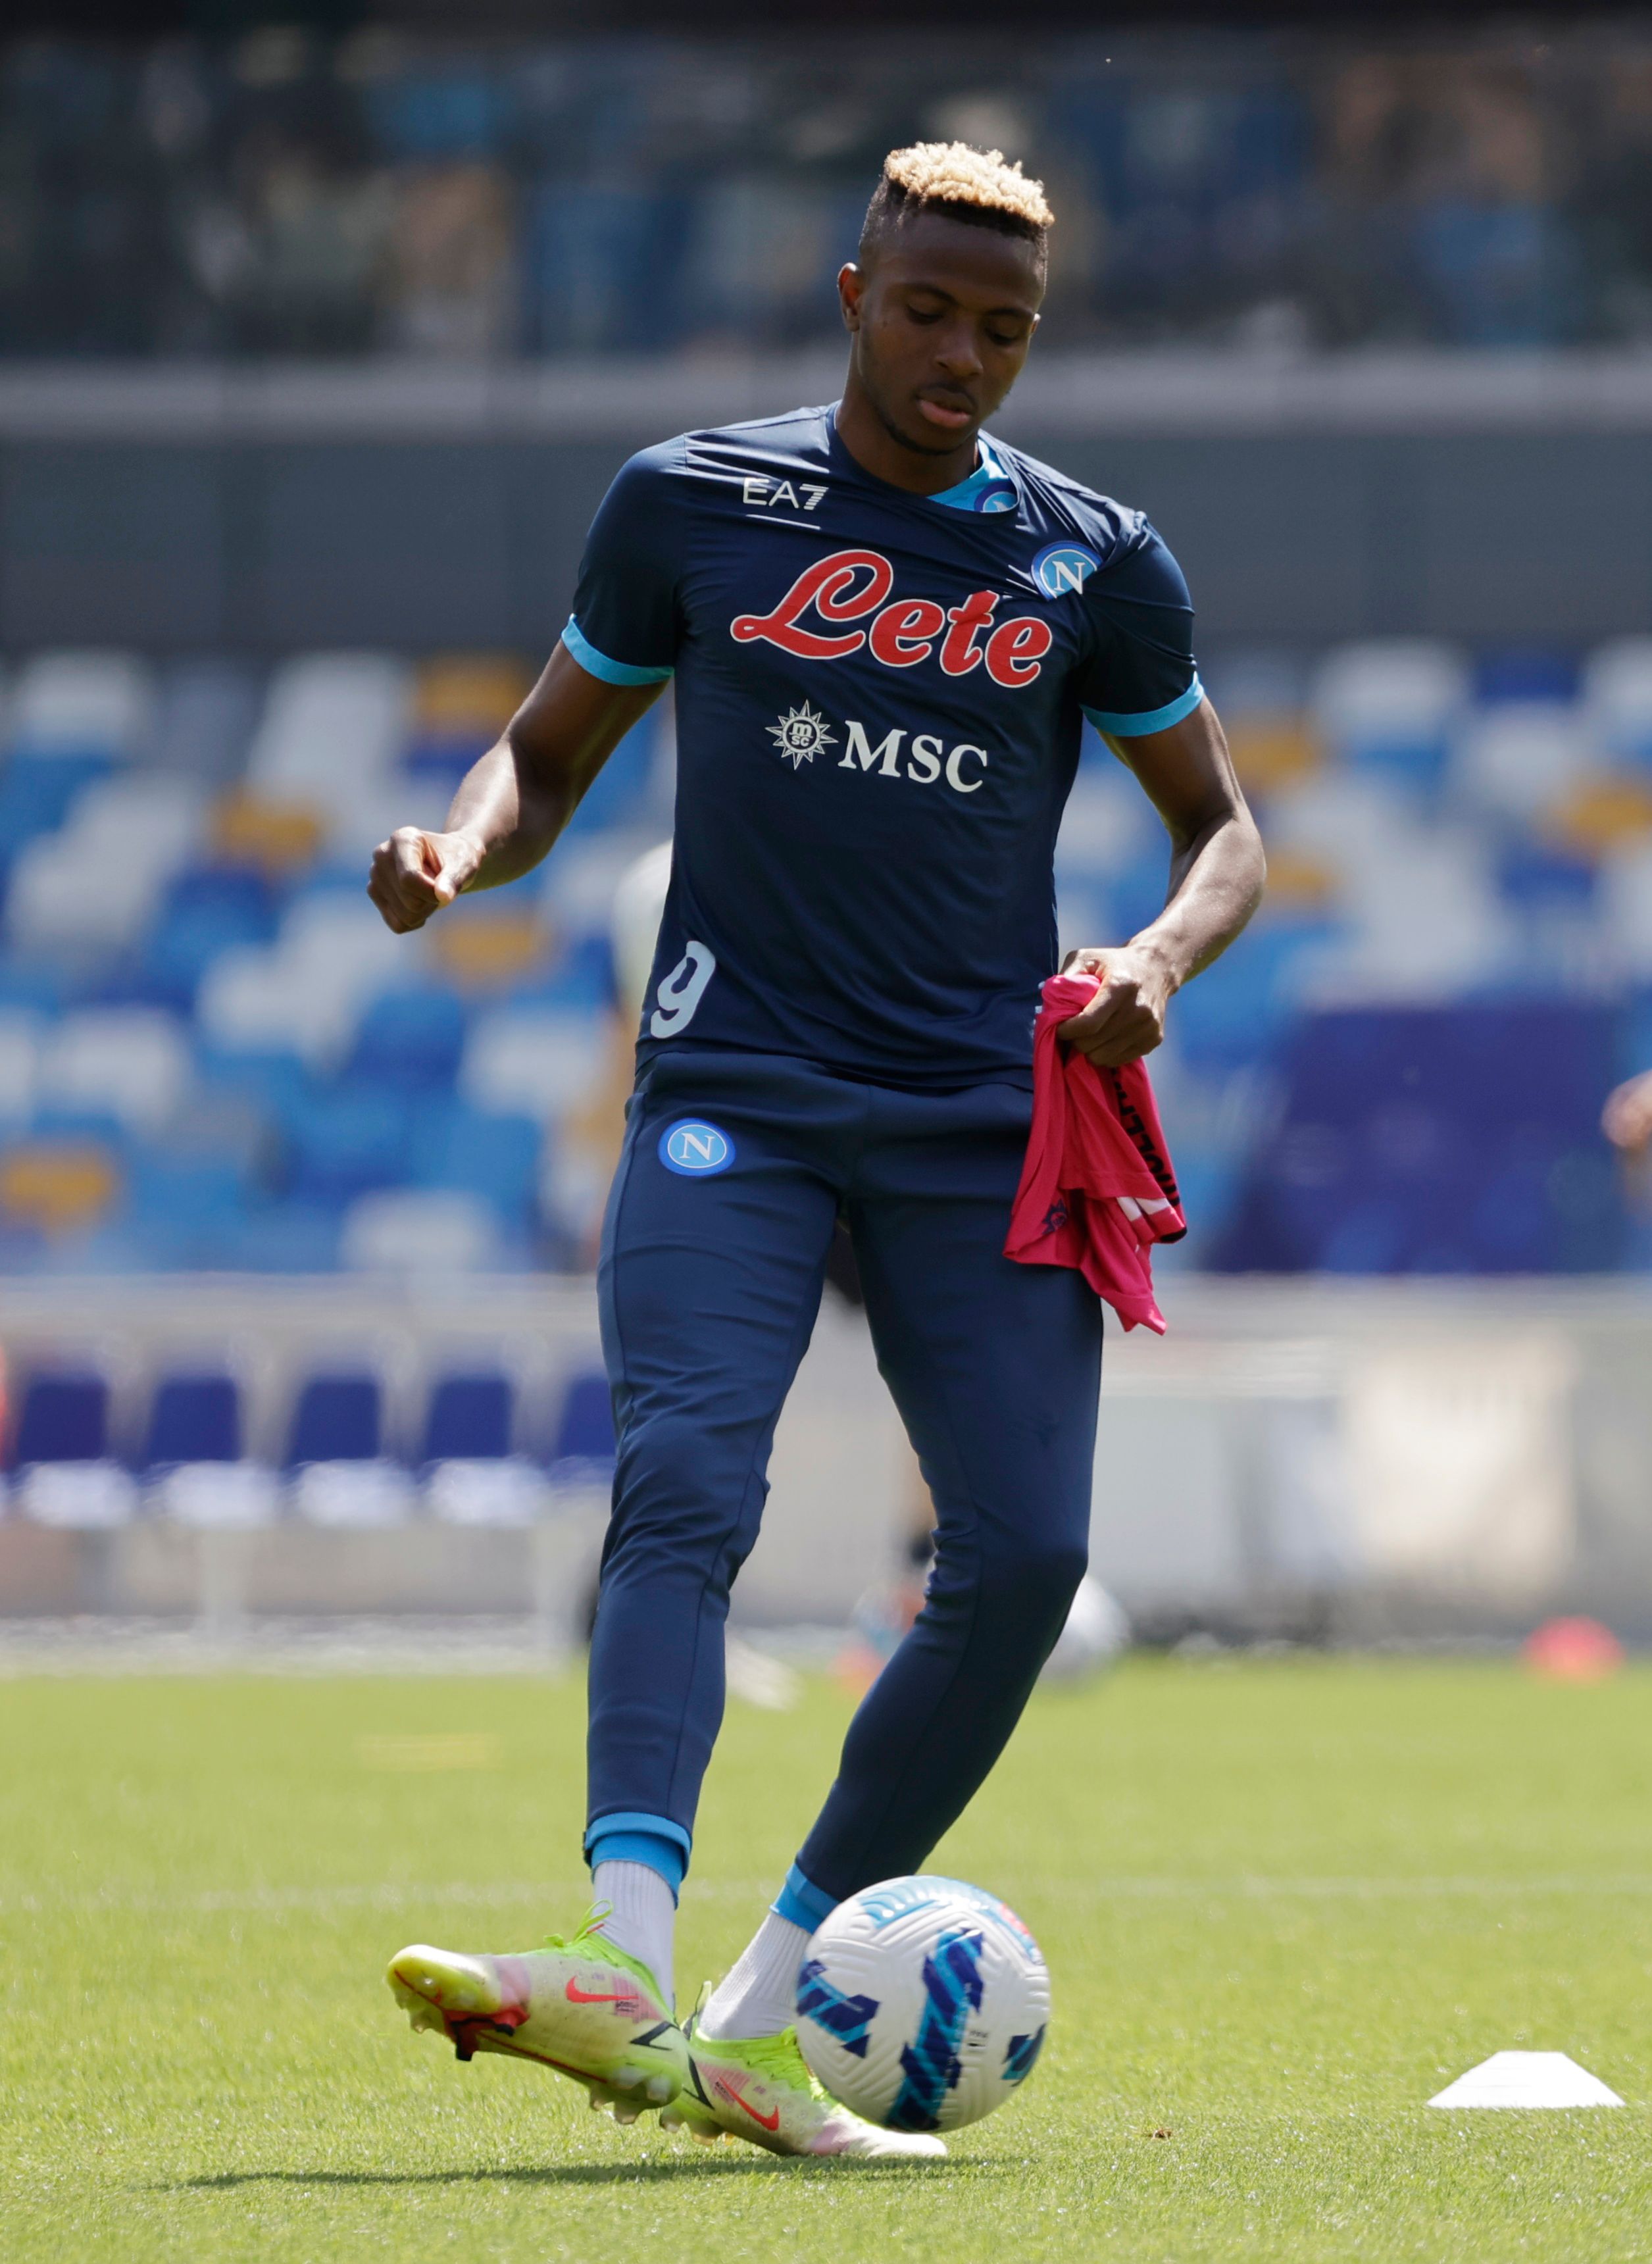 Napoli's Osimhen warming up.